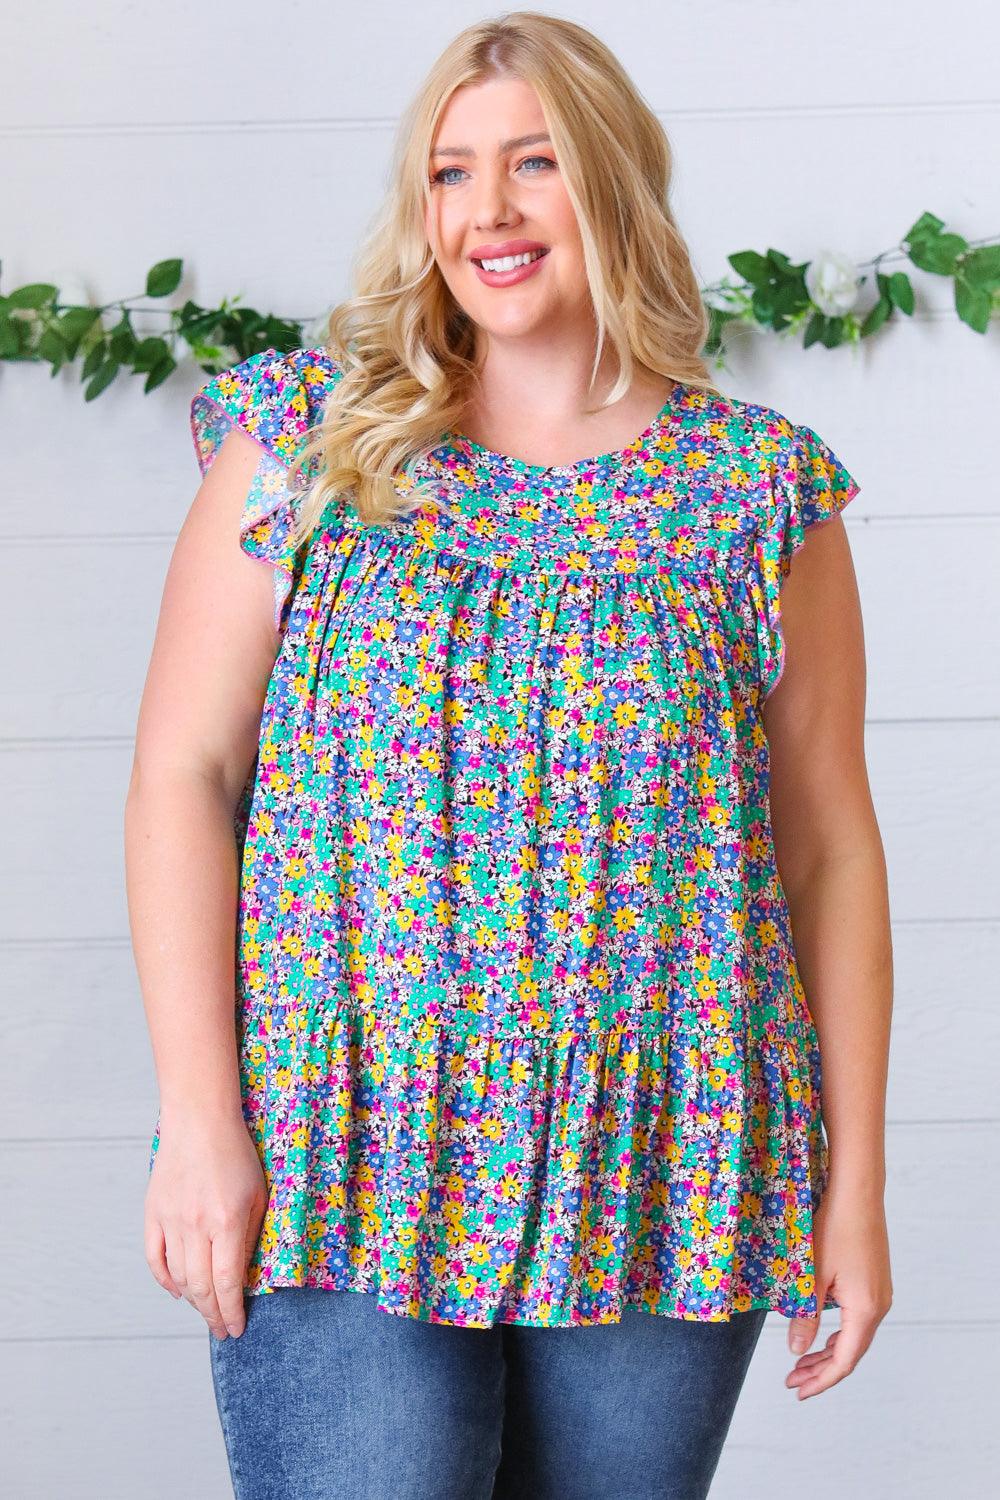 Essentially The Best Floral Print Ruffle Tiered Top